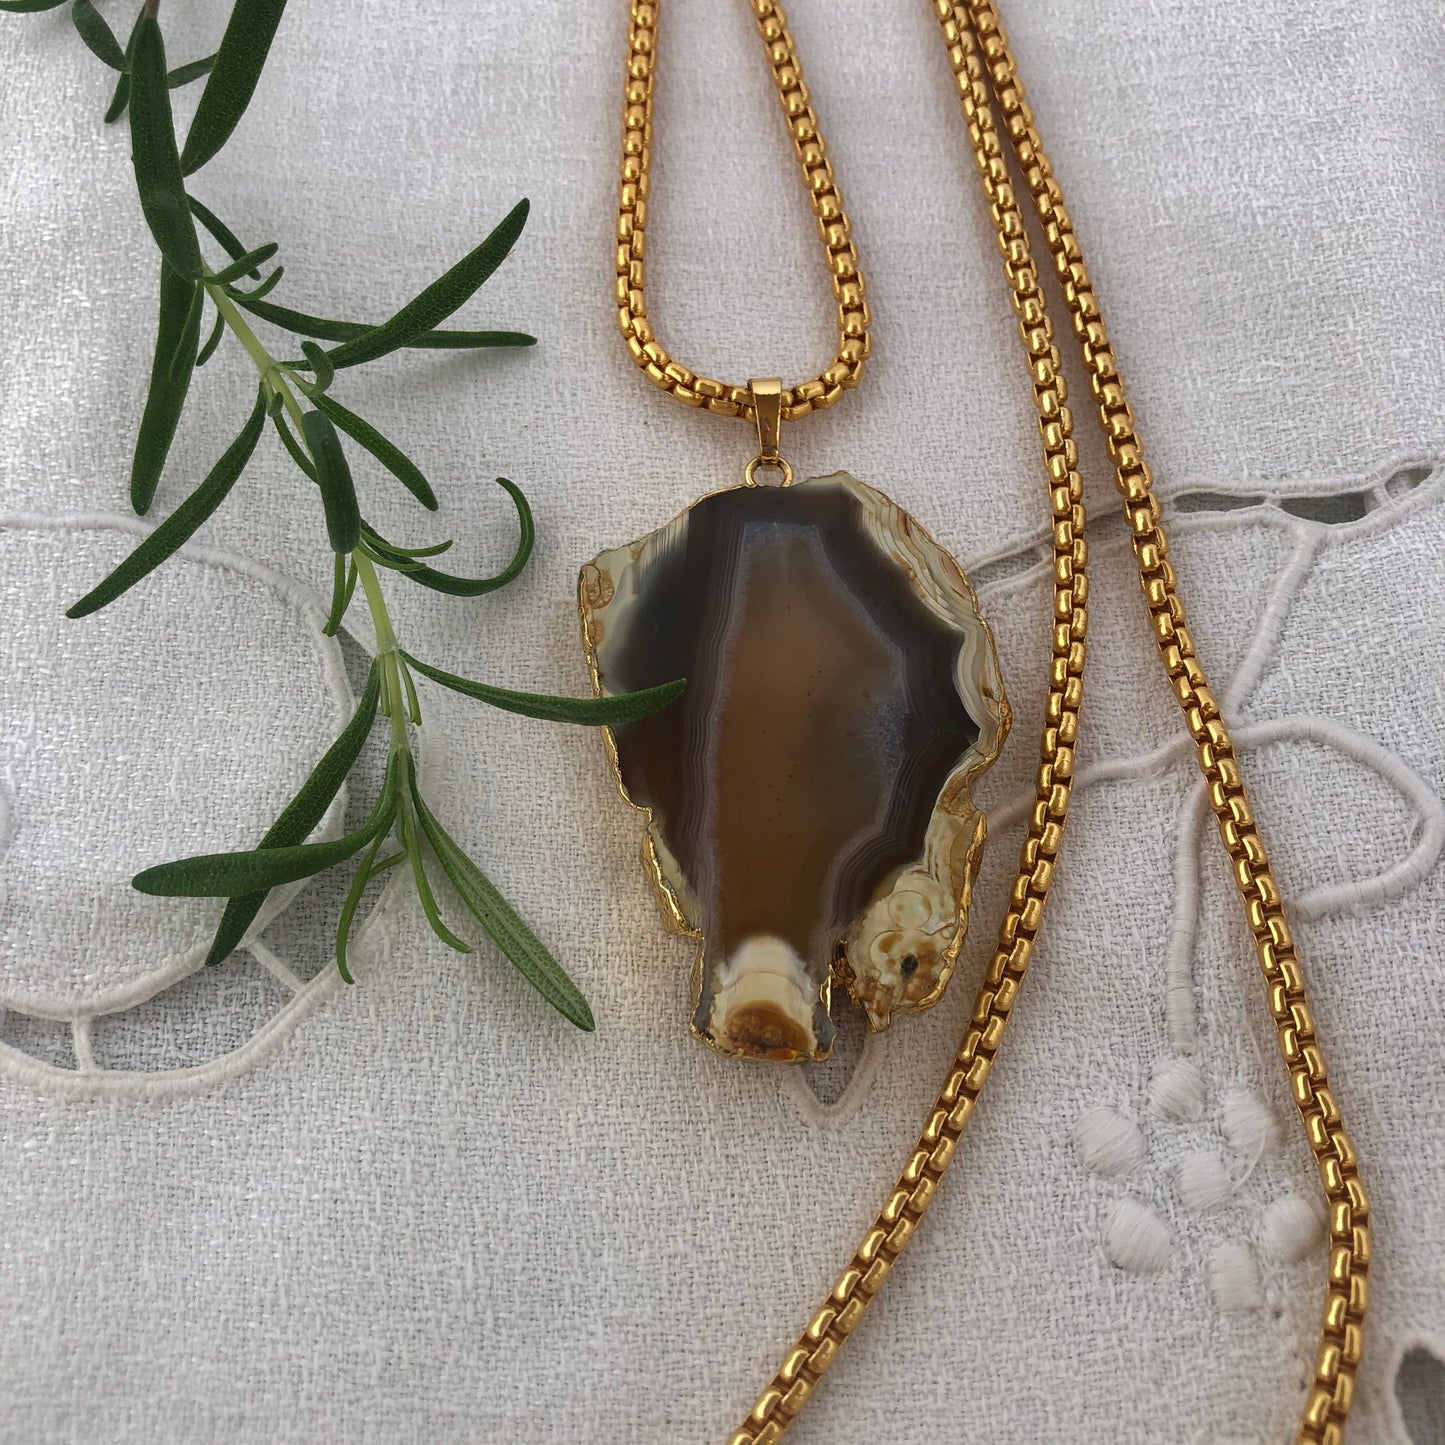 Agate Pendant  in gold chain necklace